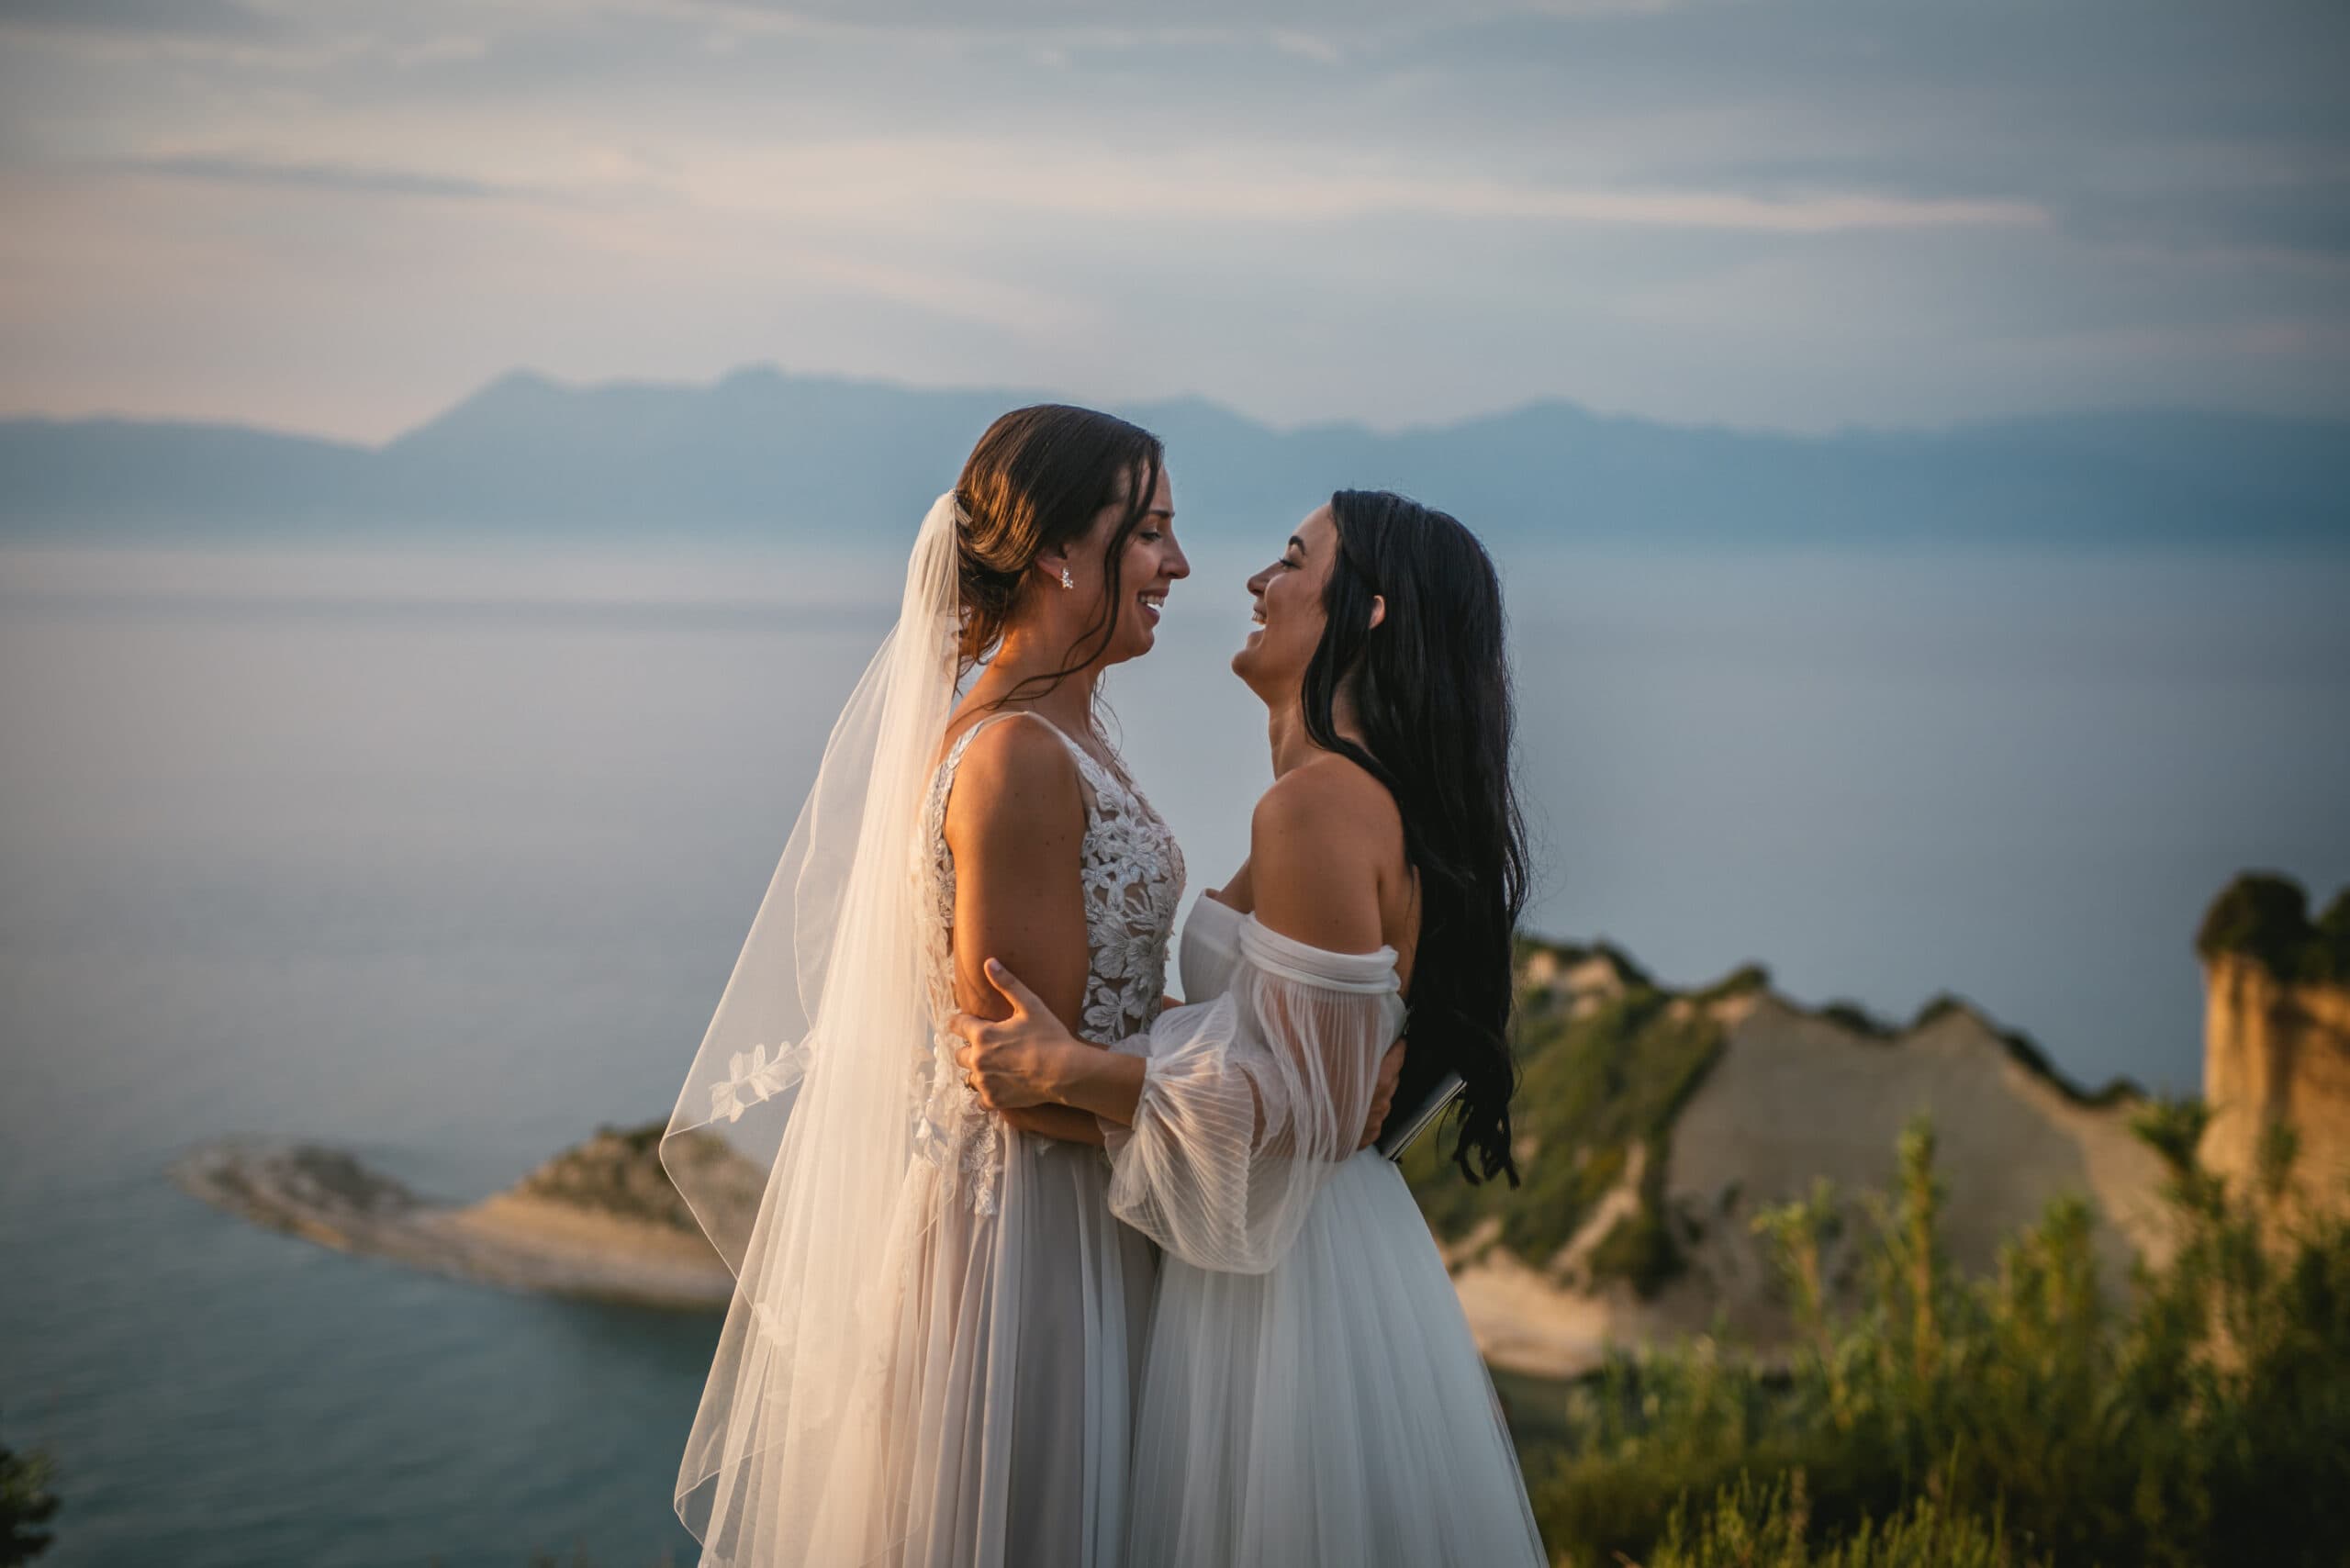 The couple's genuine smiles capturing the essence of their Corfu elopement ceremony.